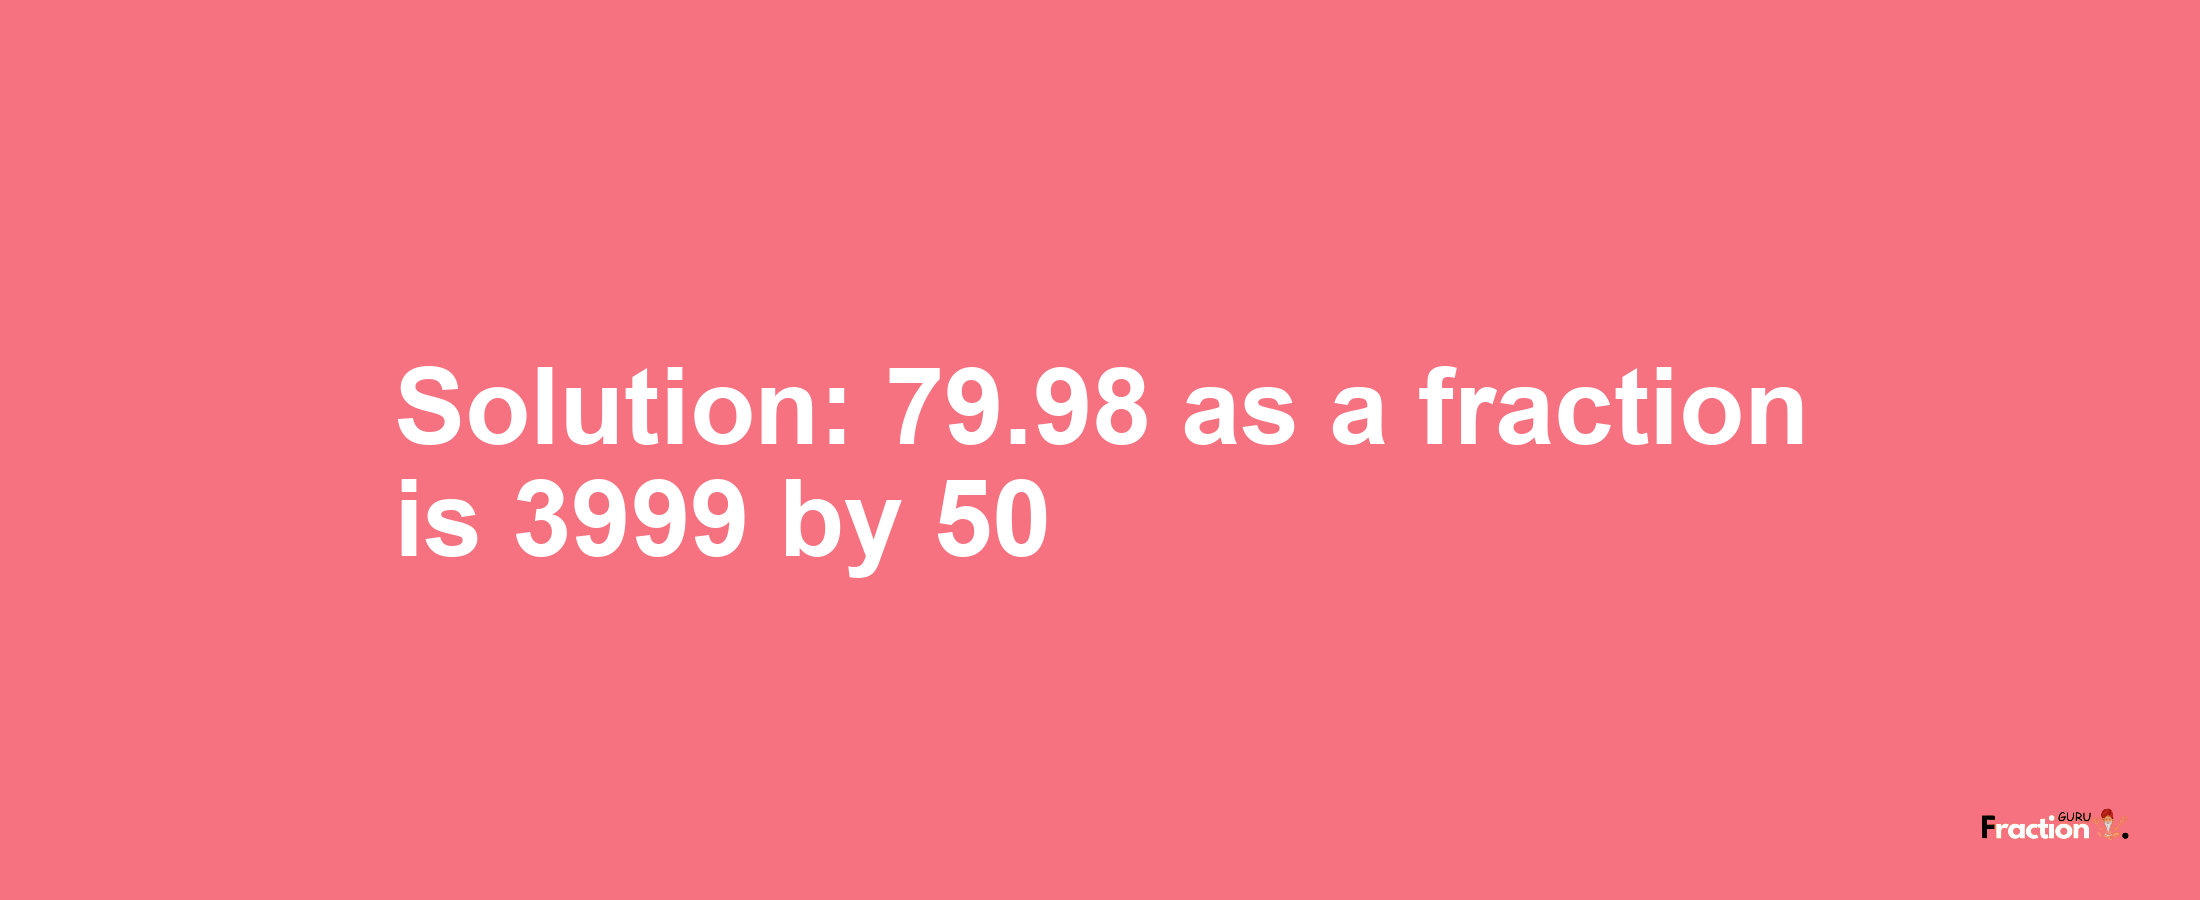 Solution:79.98 as a fraction is 3999/50